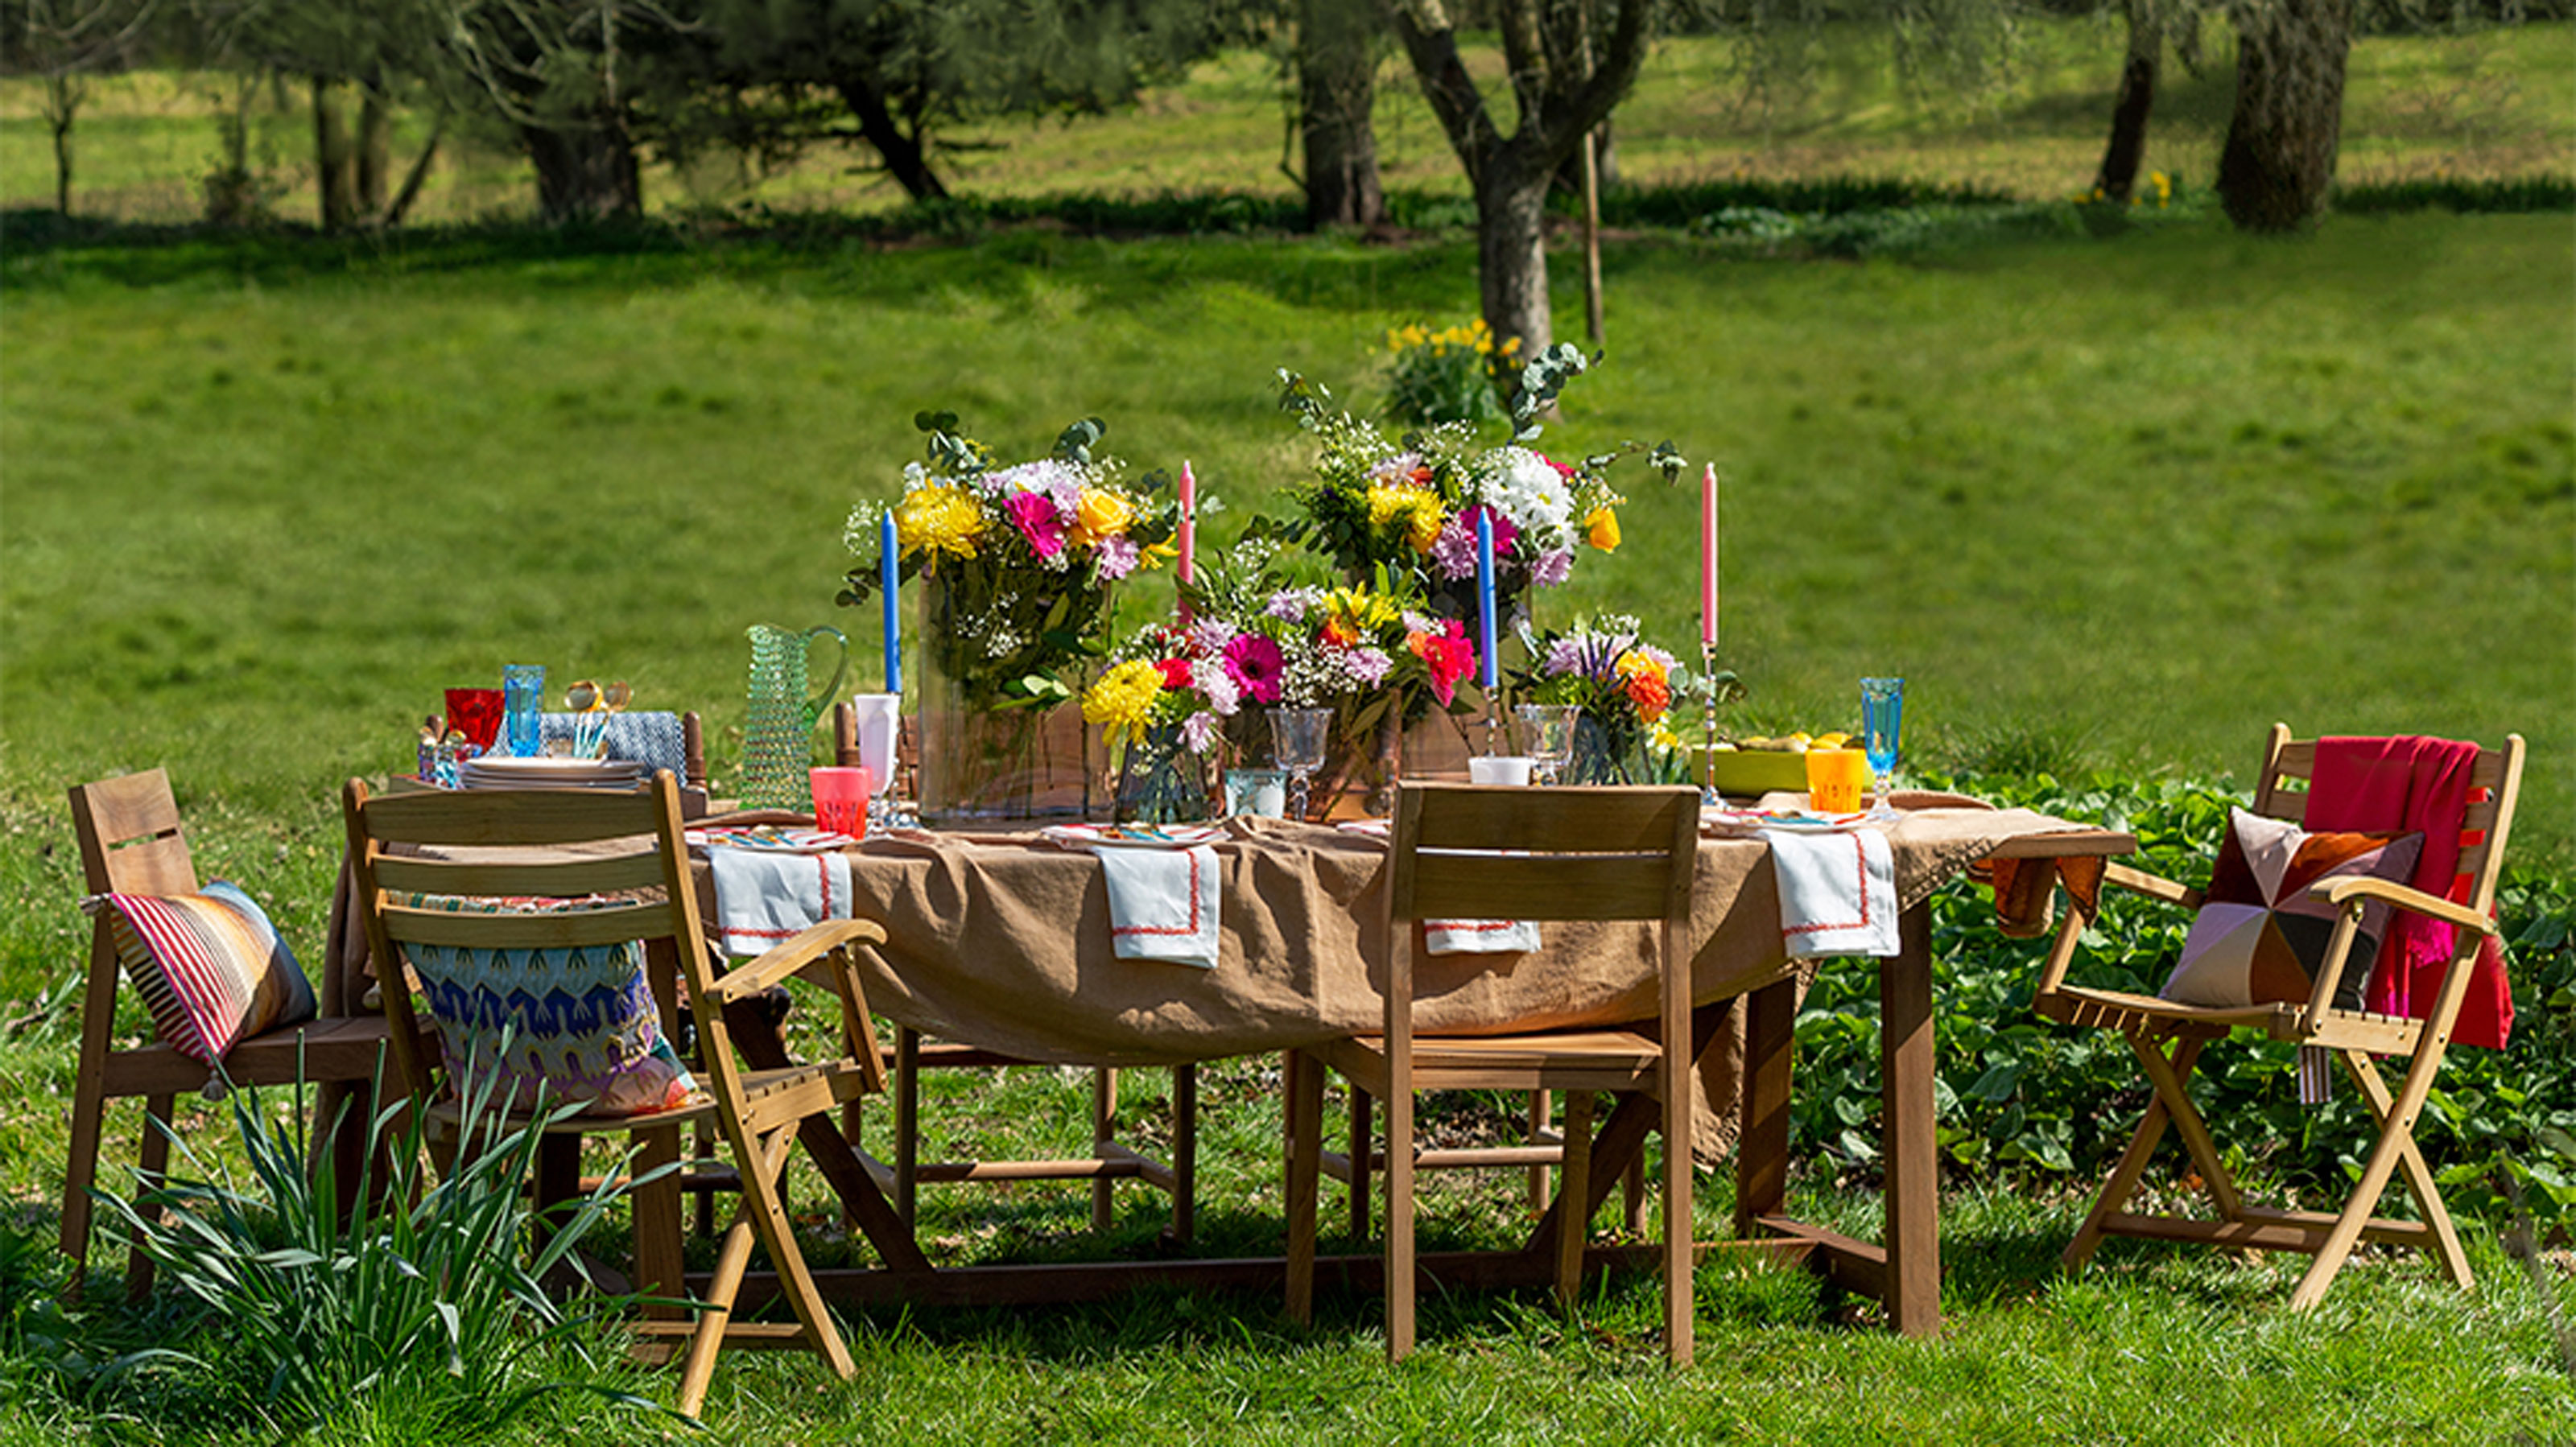 8-fun-outdoor-birthday-picnic-ideas-that-will-make-your-day-extra-special-themtraicay